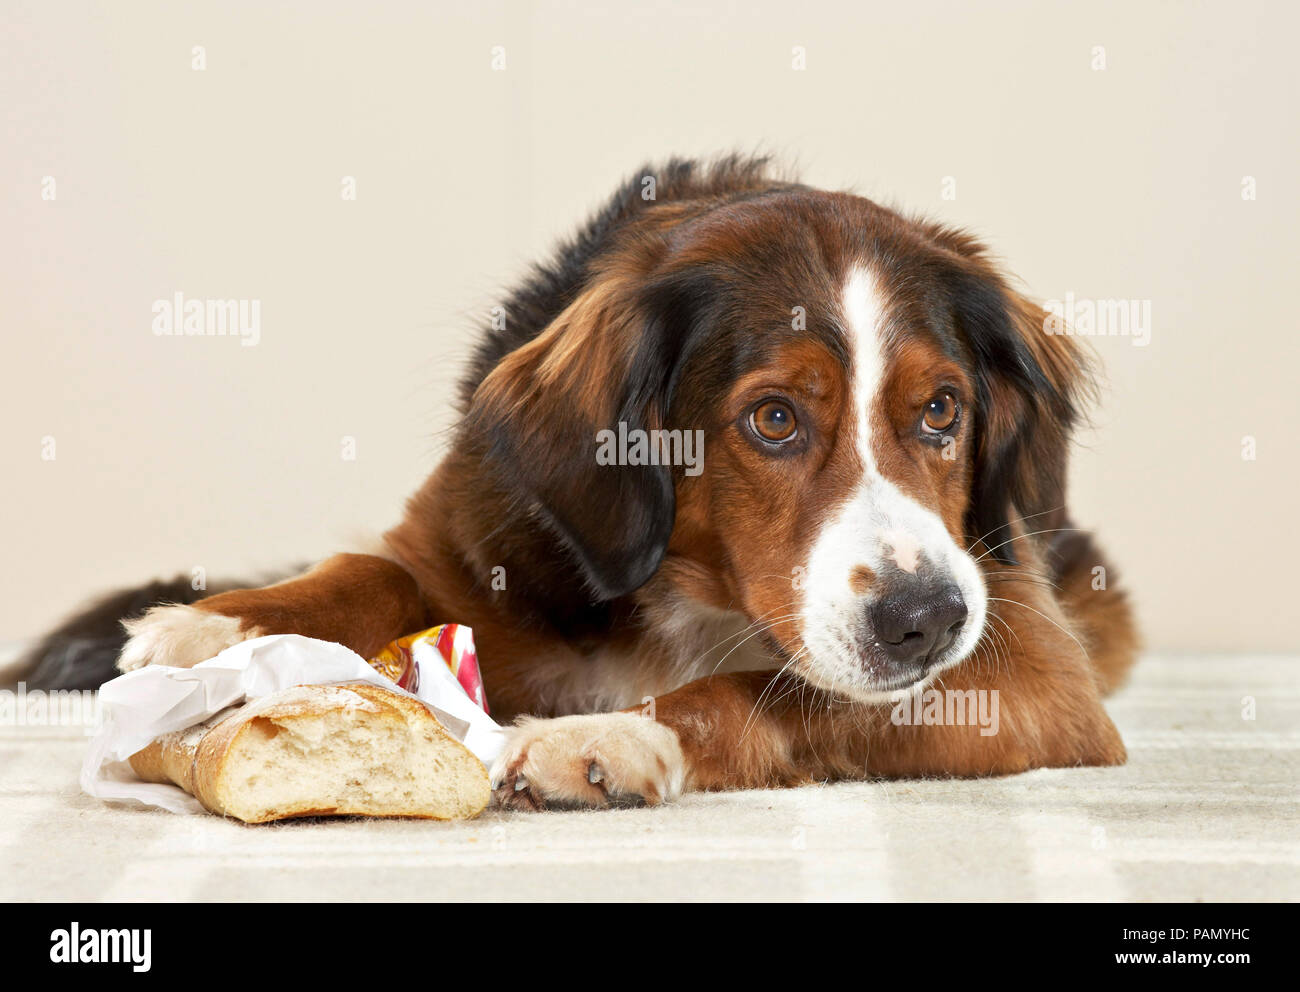 Mixed-breed dog with stolen bread. Germany. Stock Photo